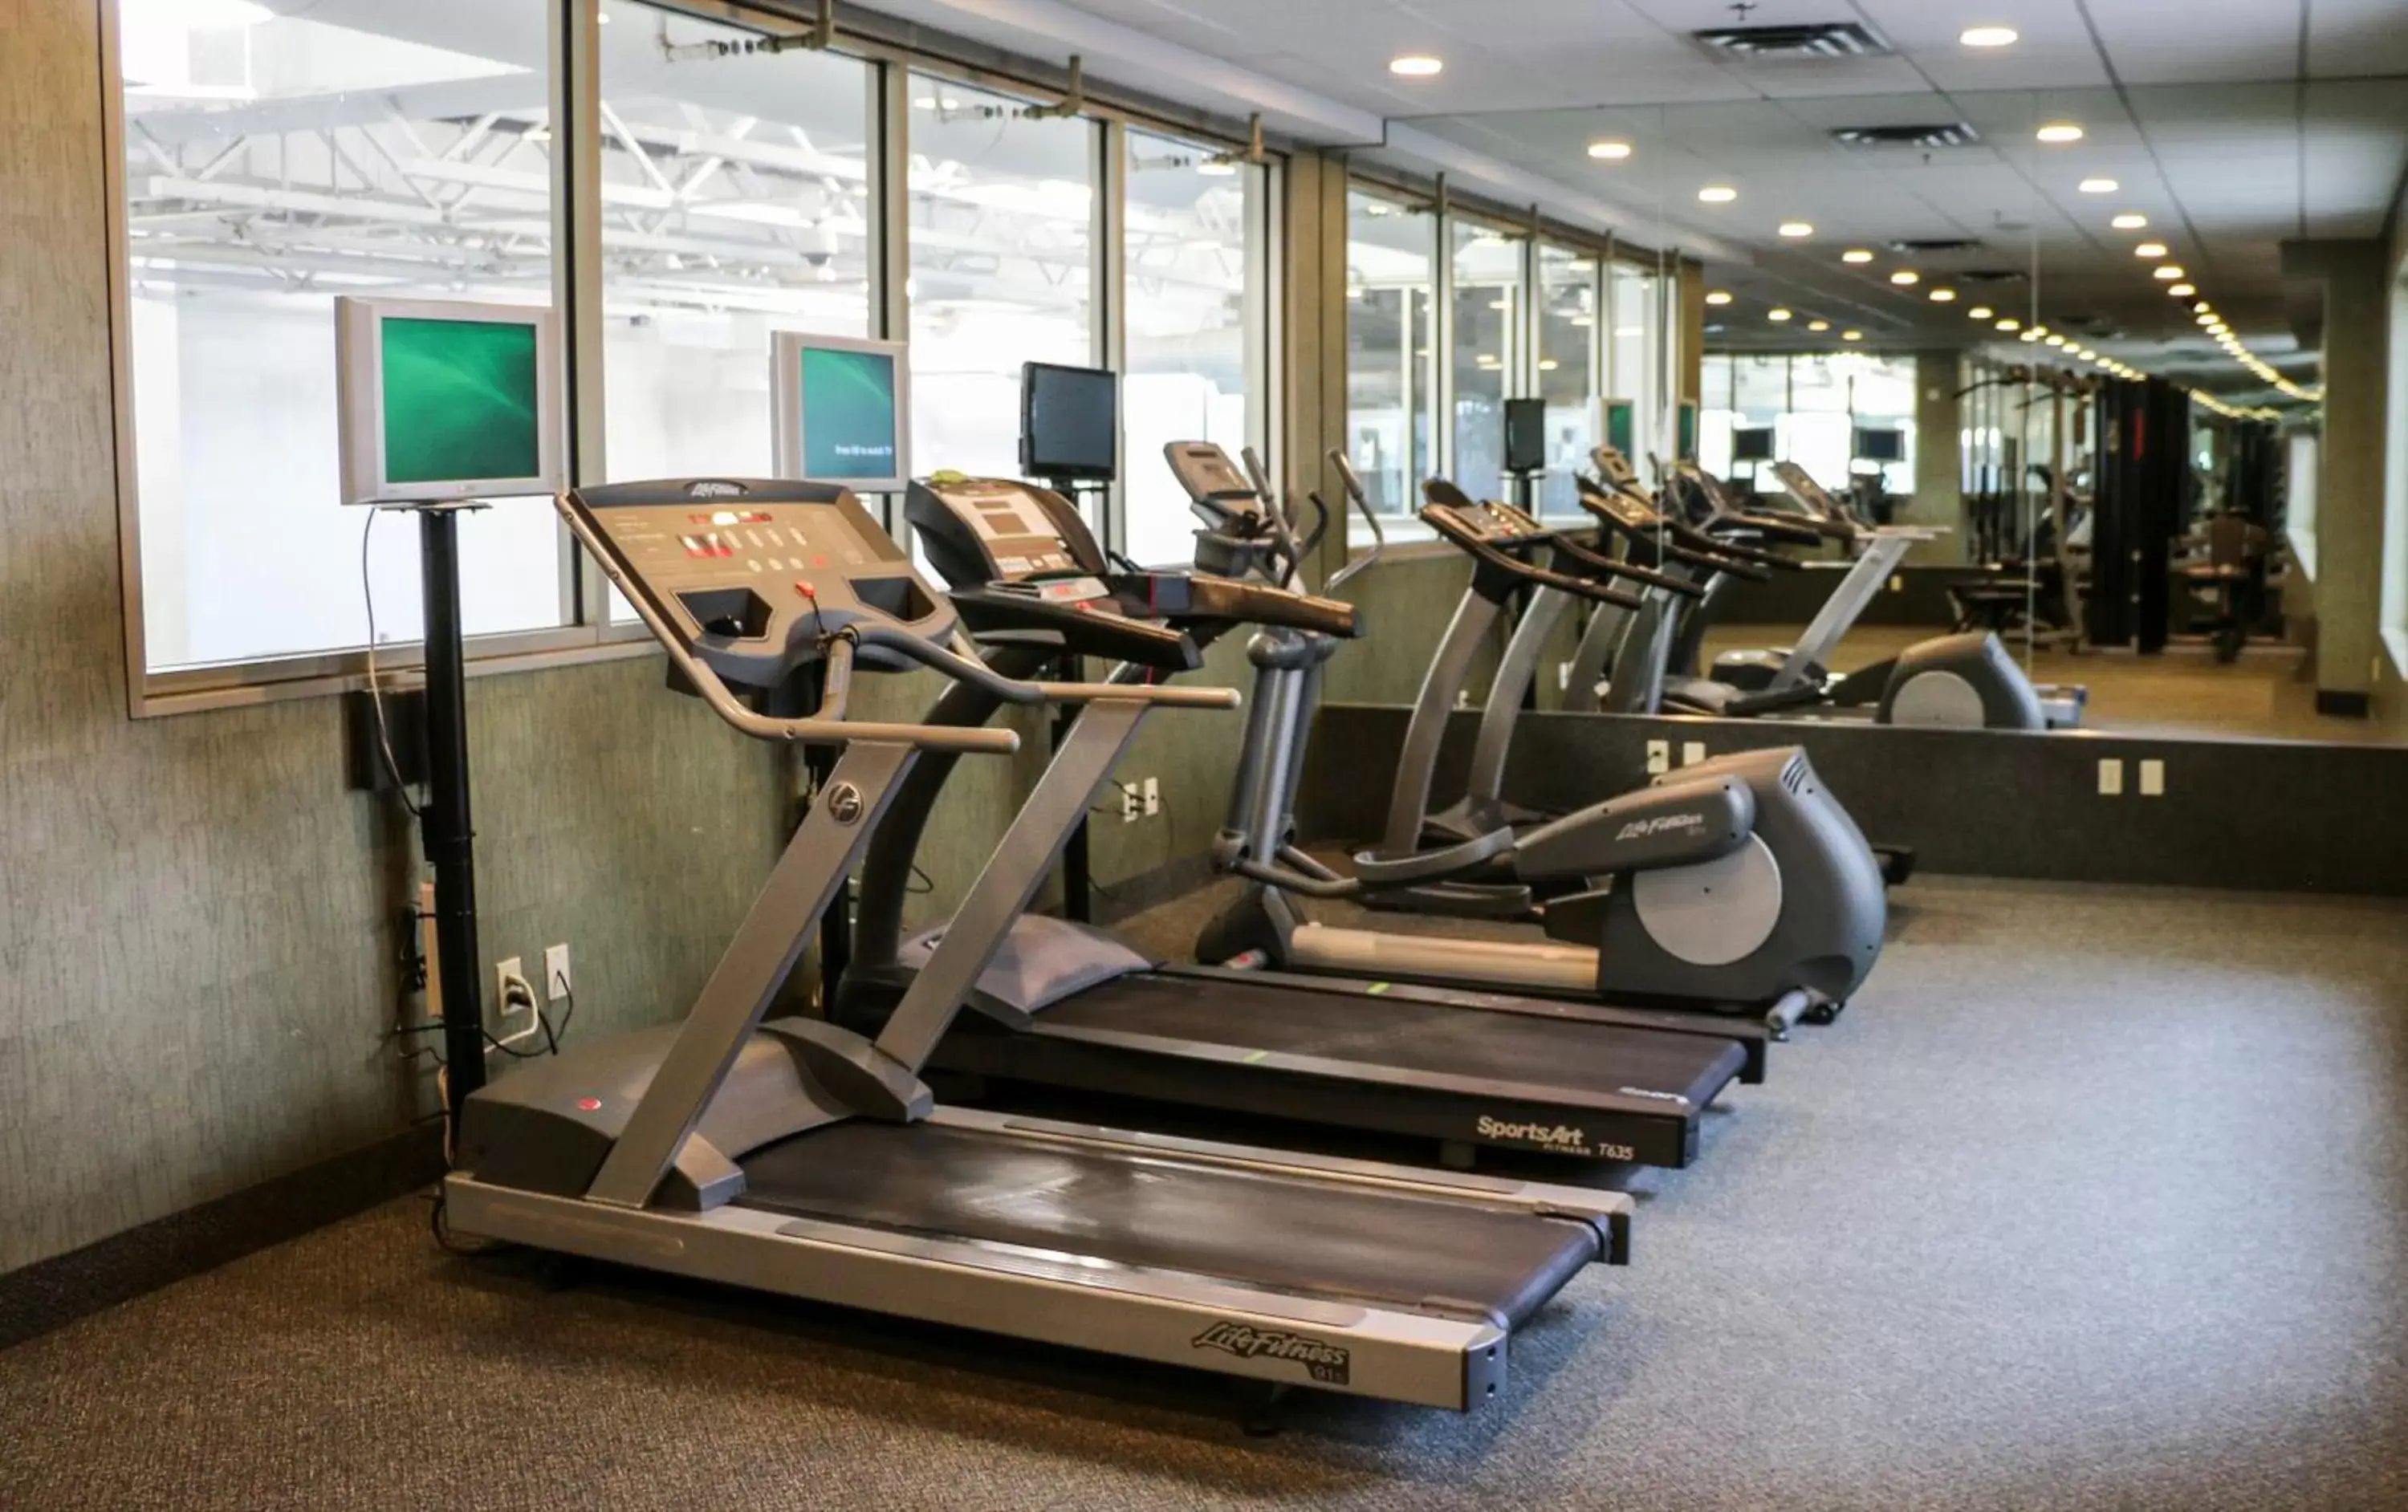 Fitness centre/facilities, Fitness Center/Facilities in Deerfoot Inn and Casino